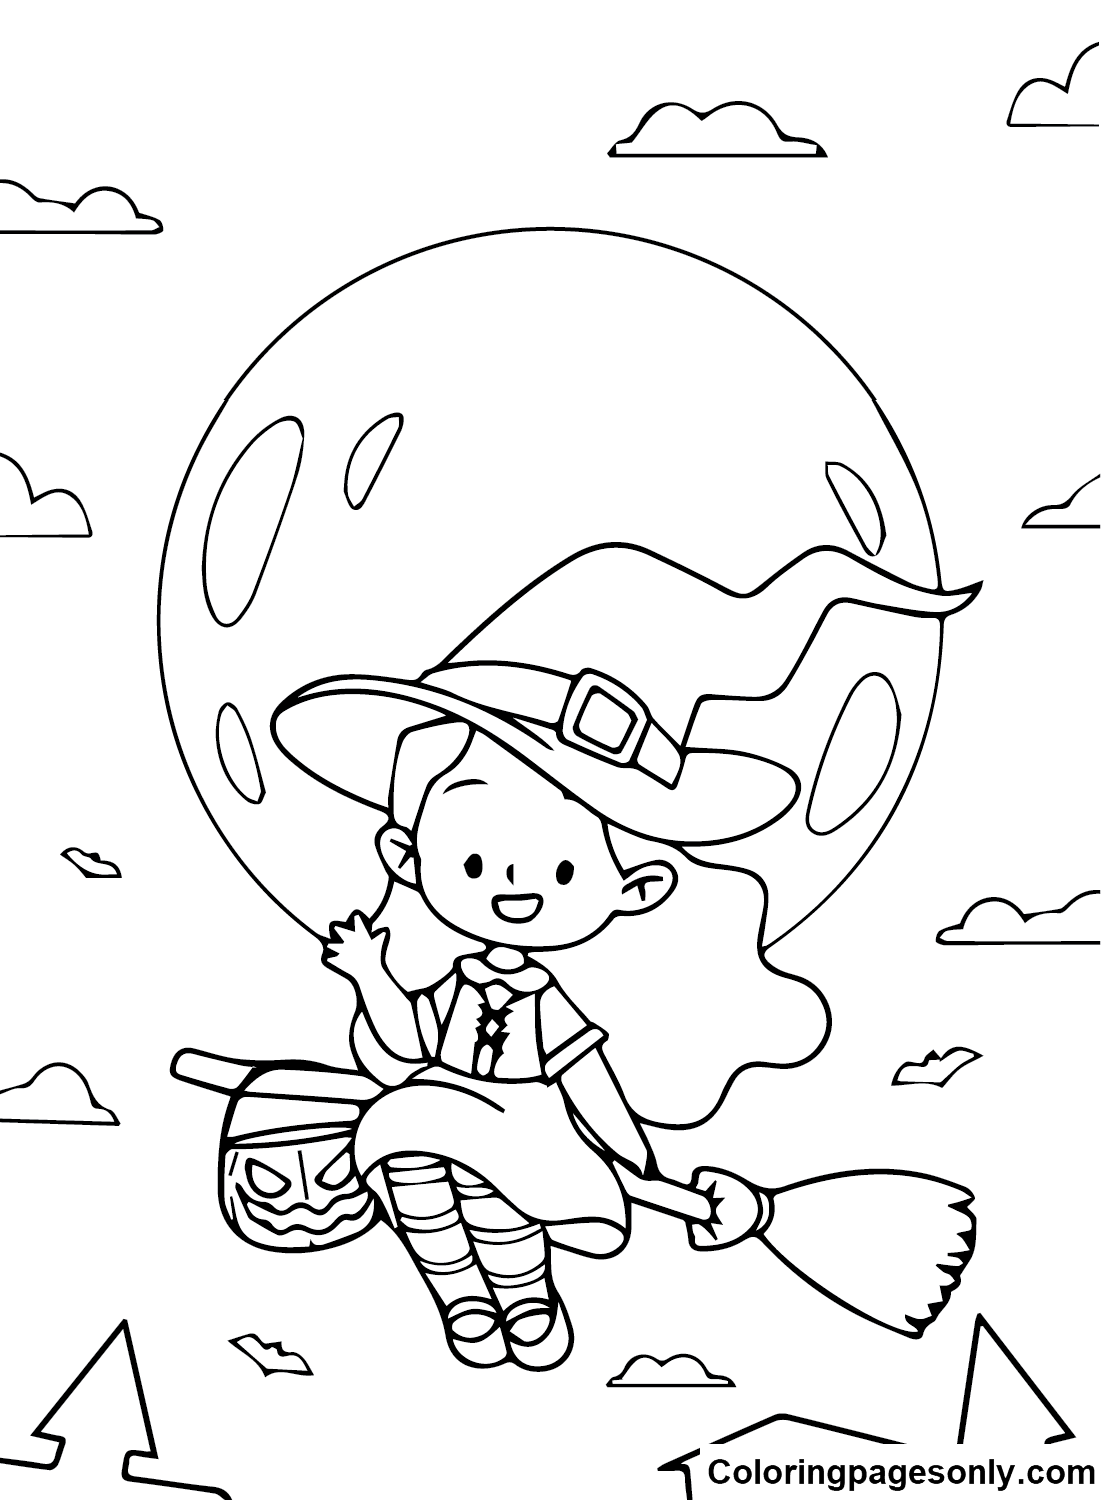 Hocus Pocus Witches Coloring Pages